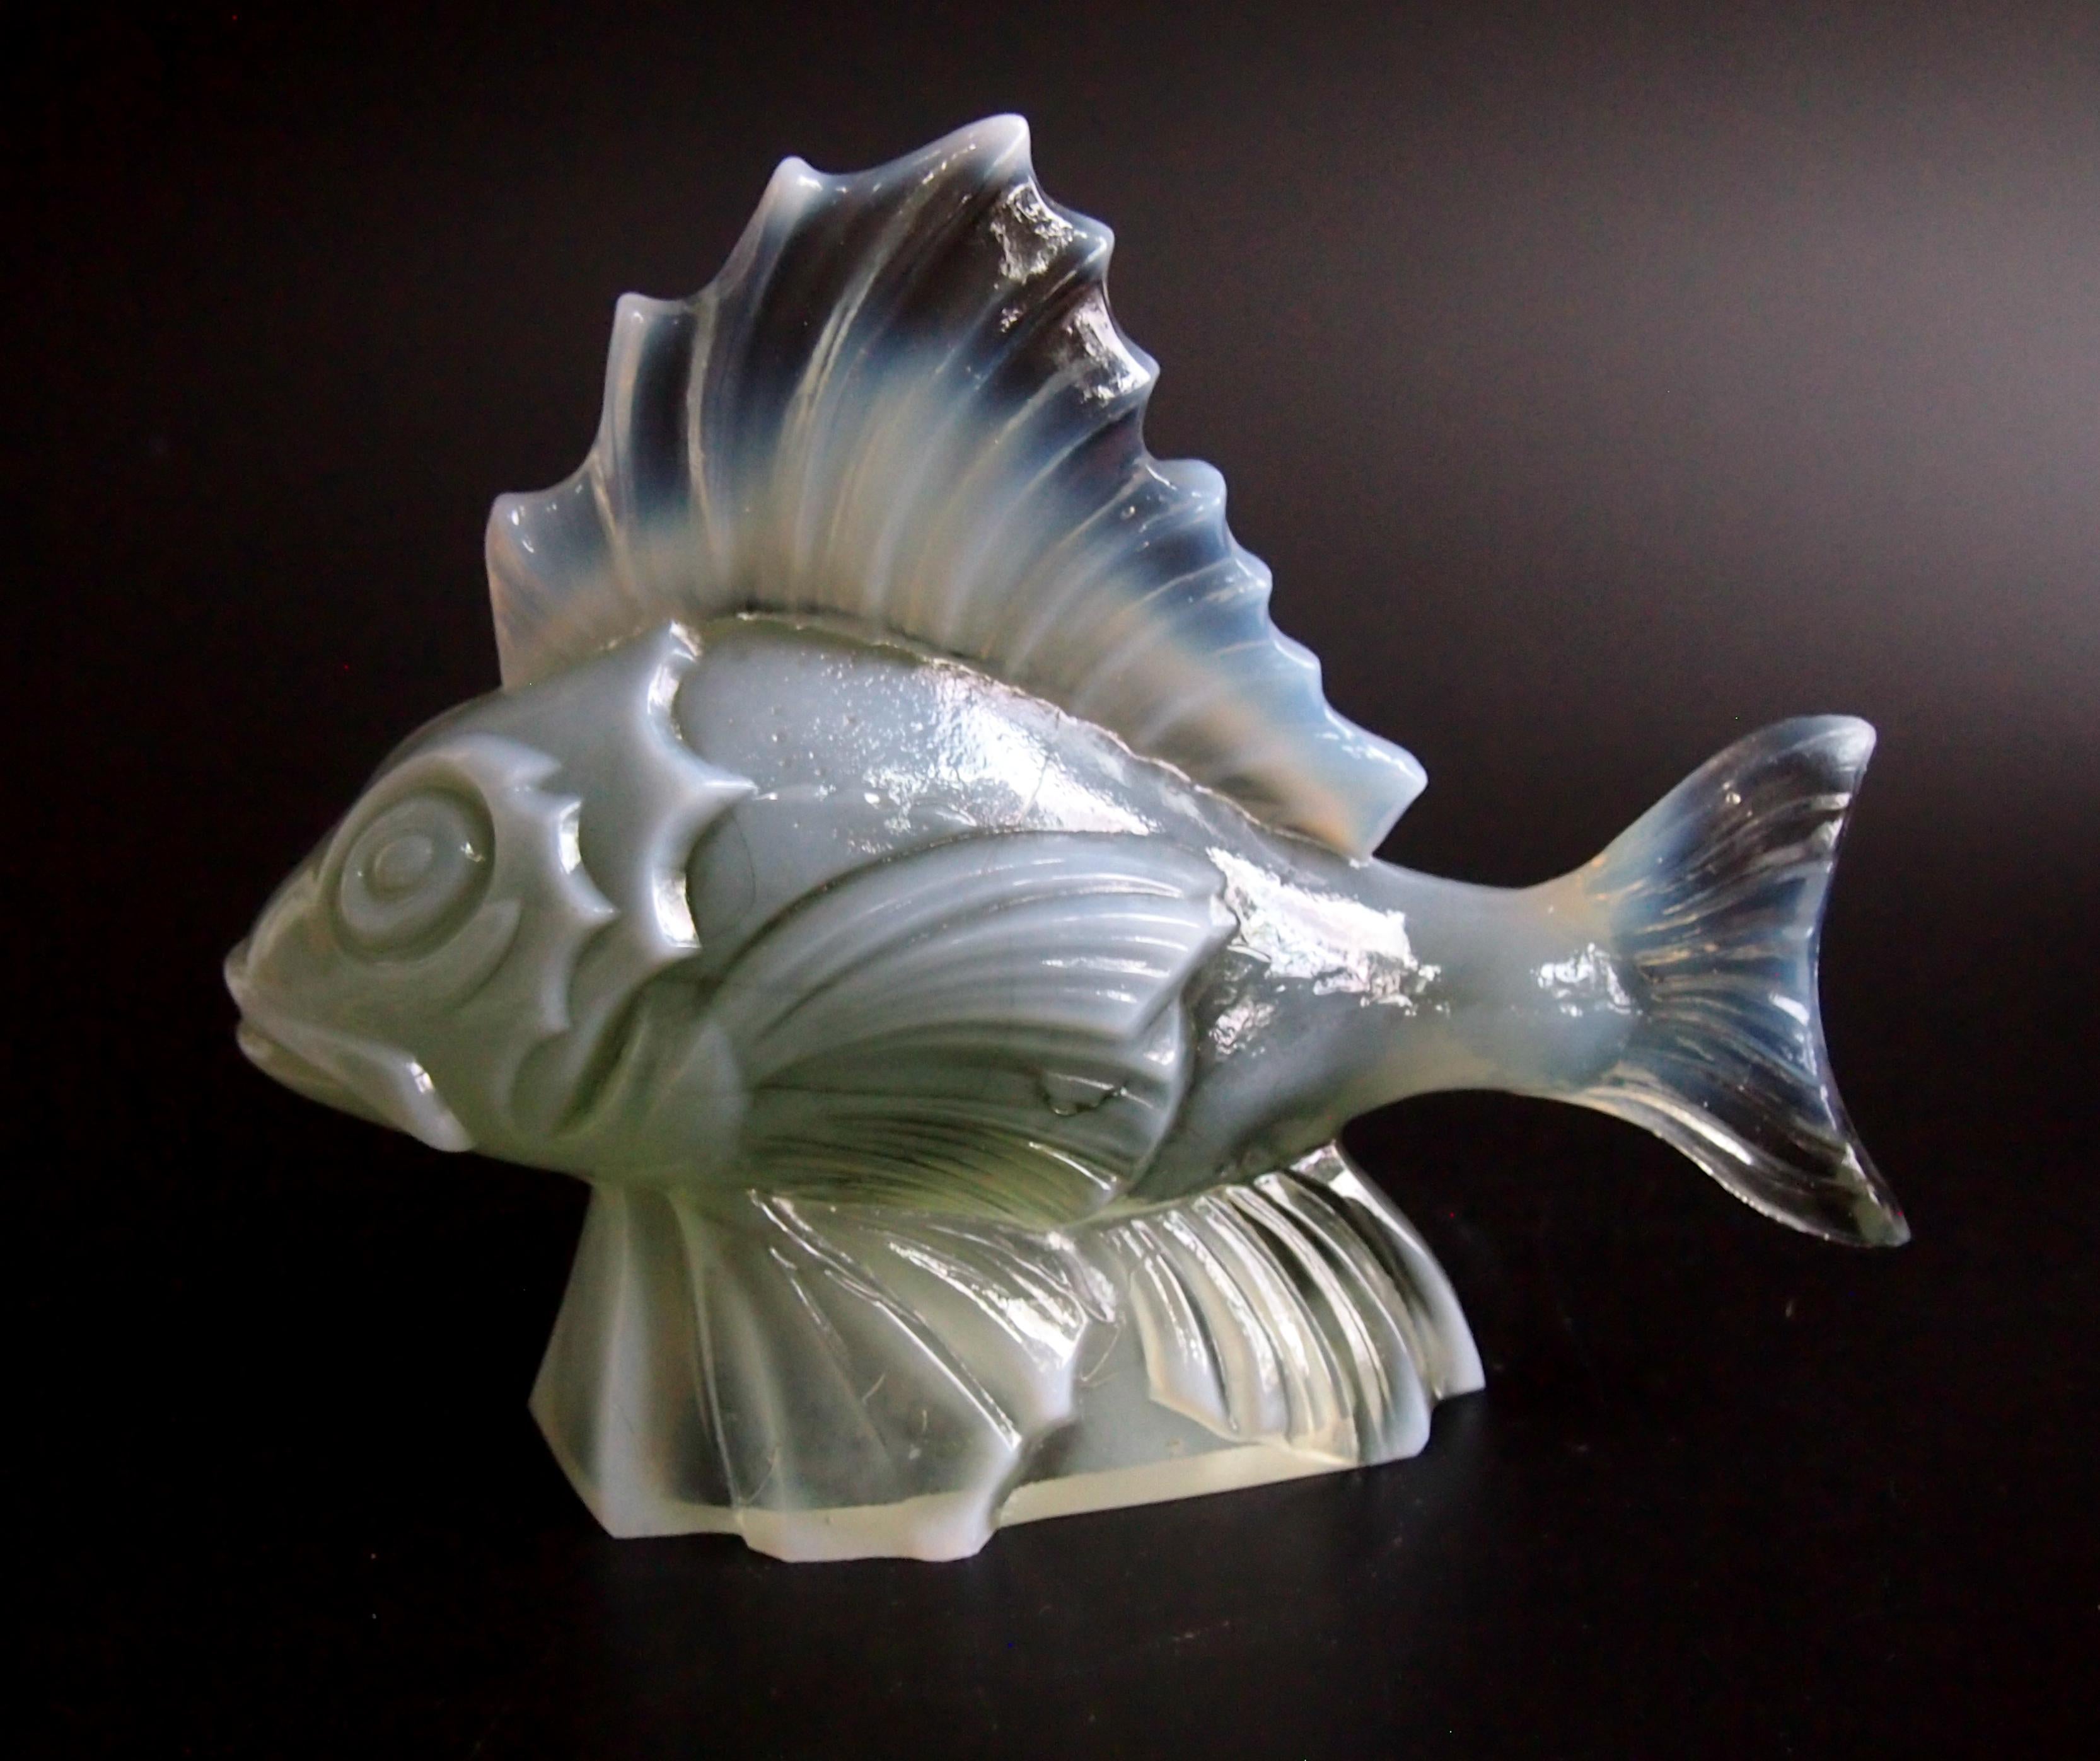 Superb Art Deco sea green opal fish statuette signed 'Made in France' and 'CLA' (Image 6). Very high Art Deco; a very pretty fierce looking 'Ugly' fish -Alas the origin of CLA is unknown they were probably a small Parisian department store that had